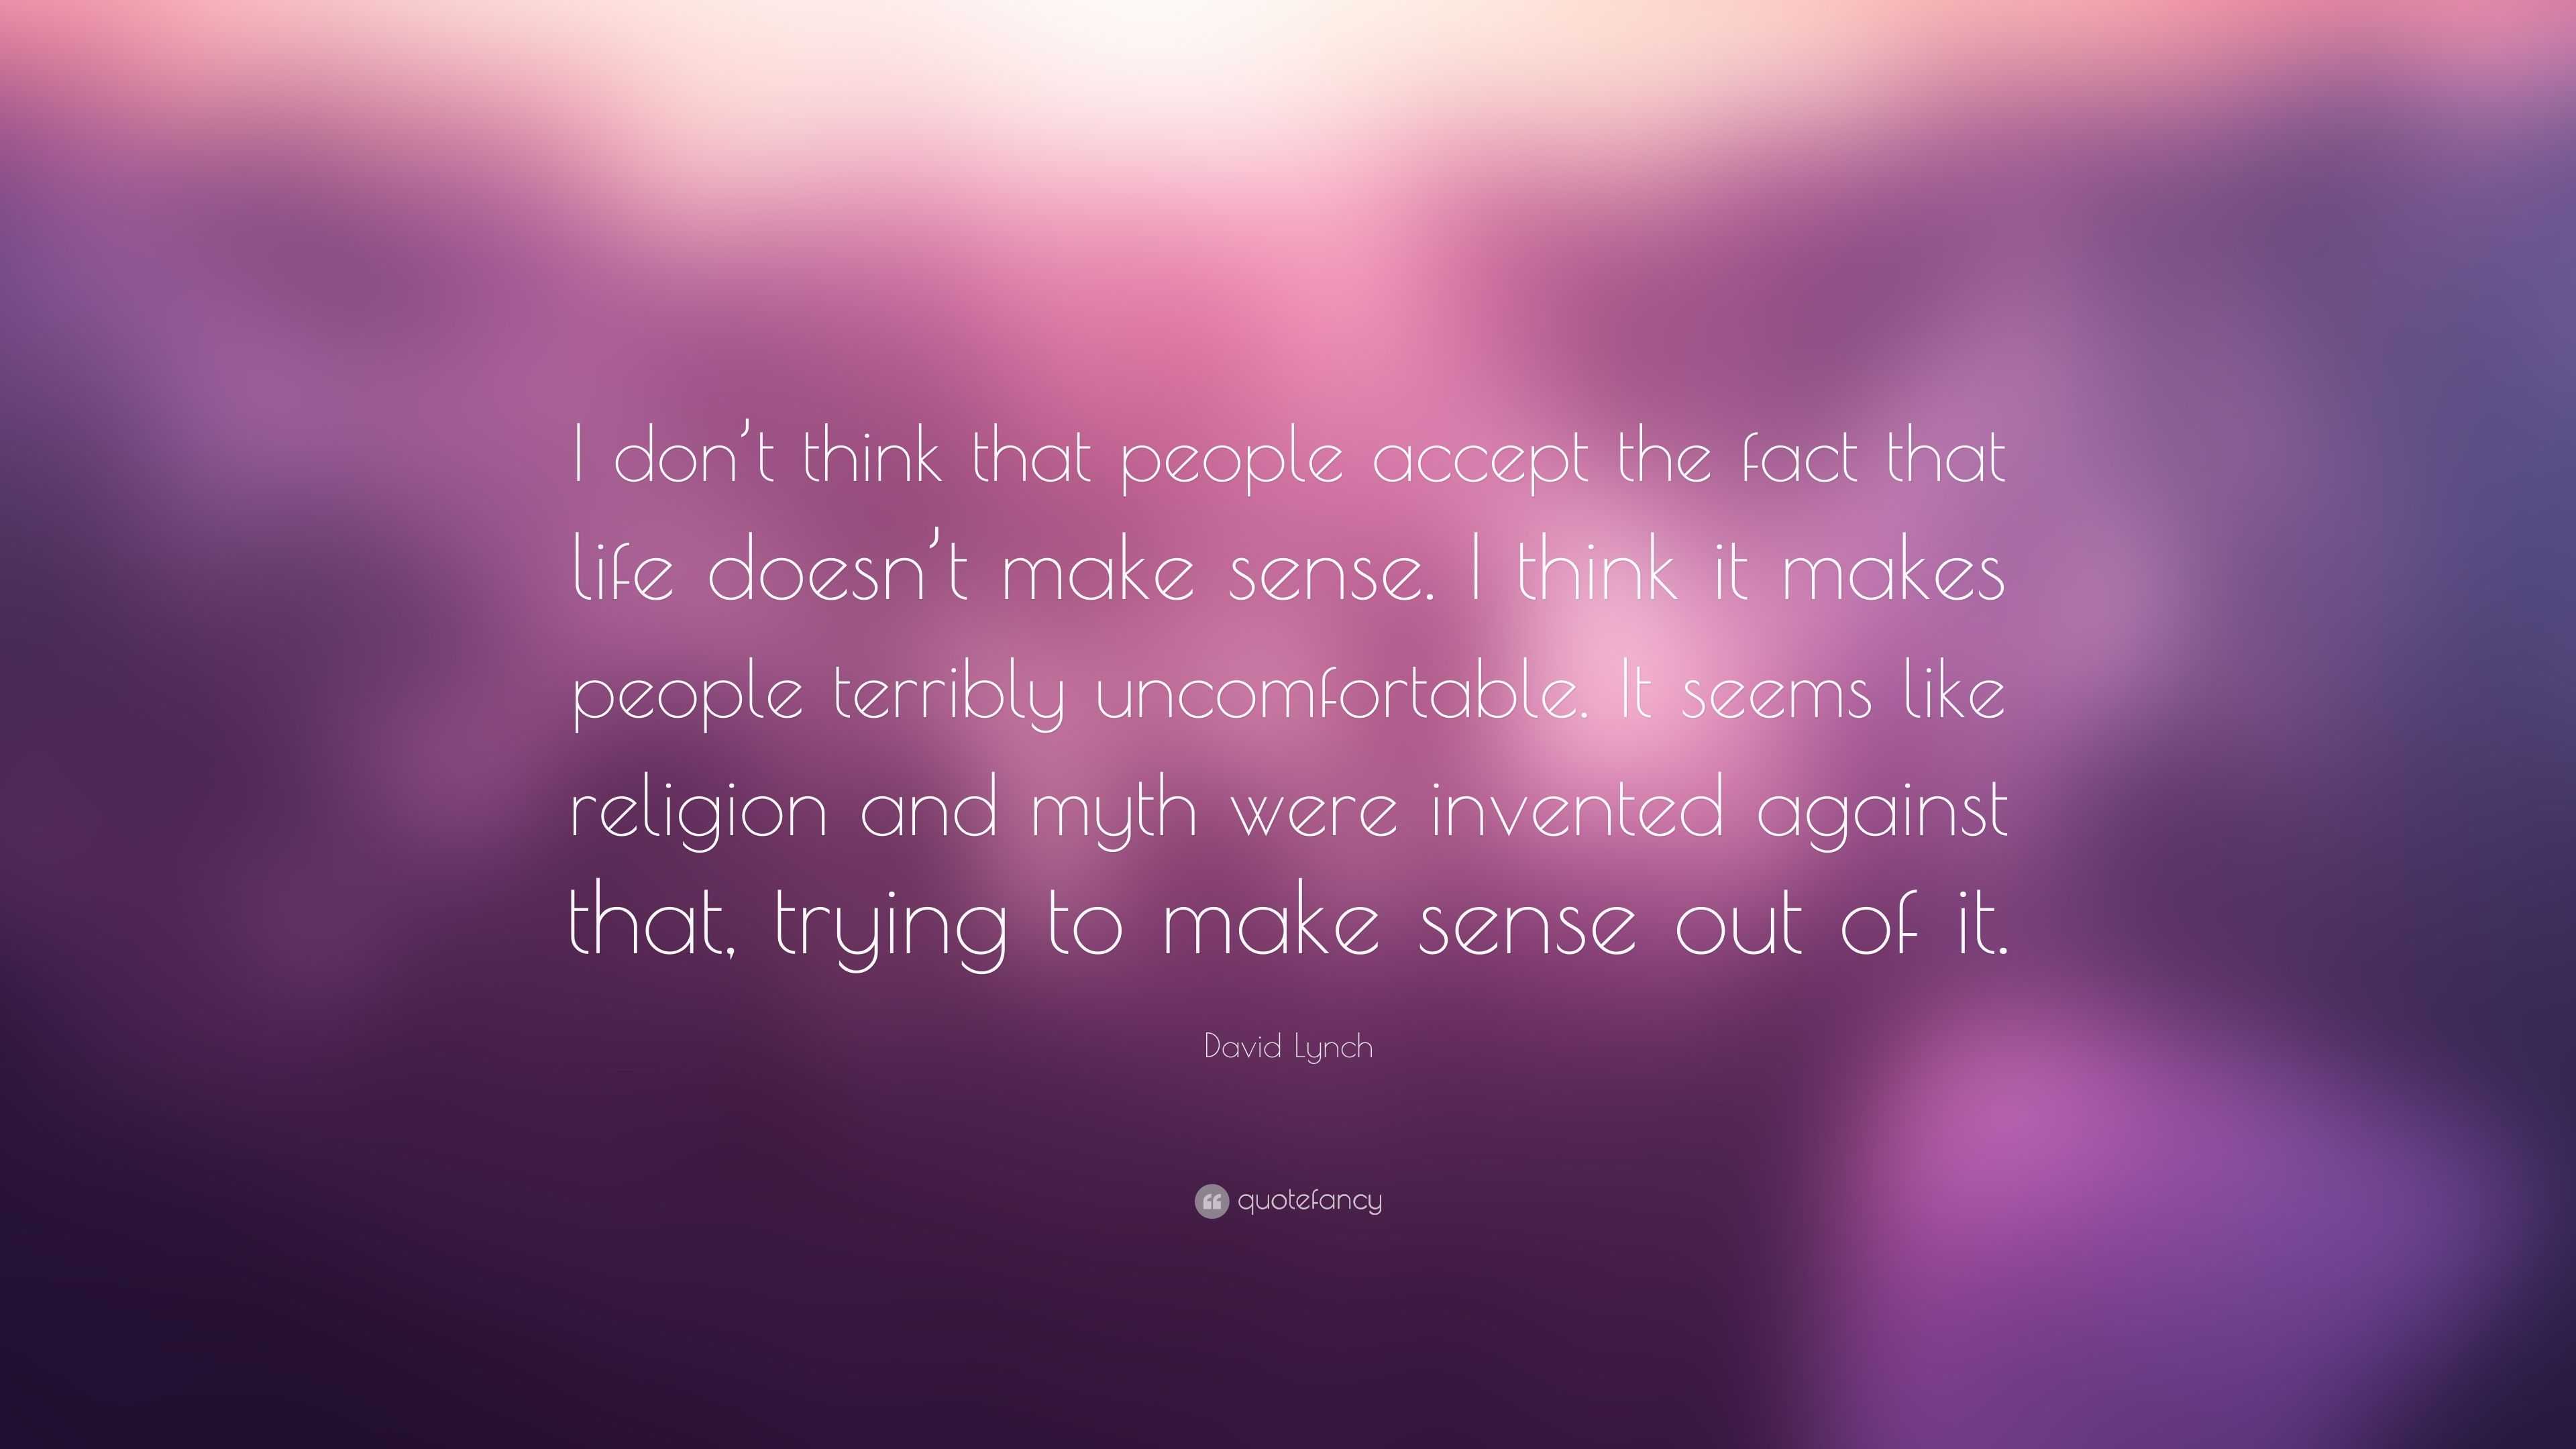 David Lynch Quote “I don t think that people accept the fact that